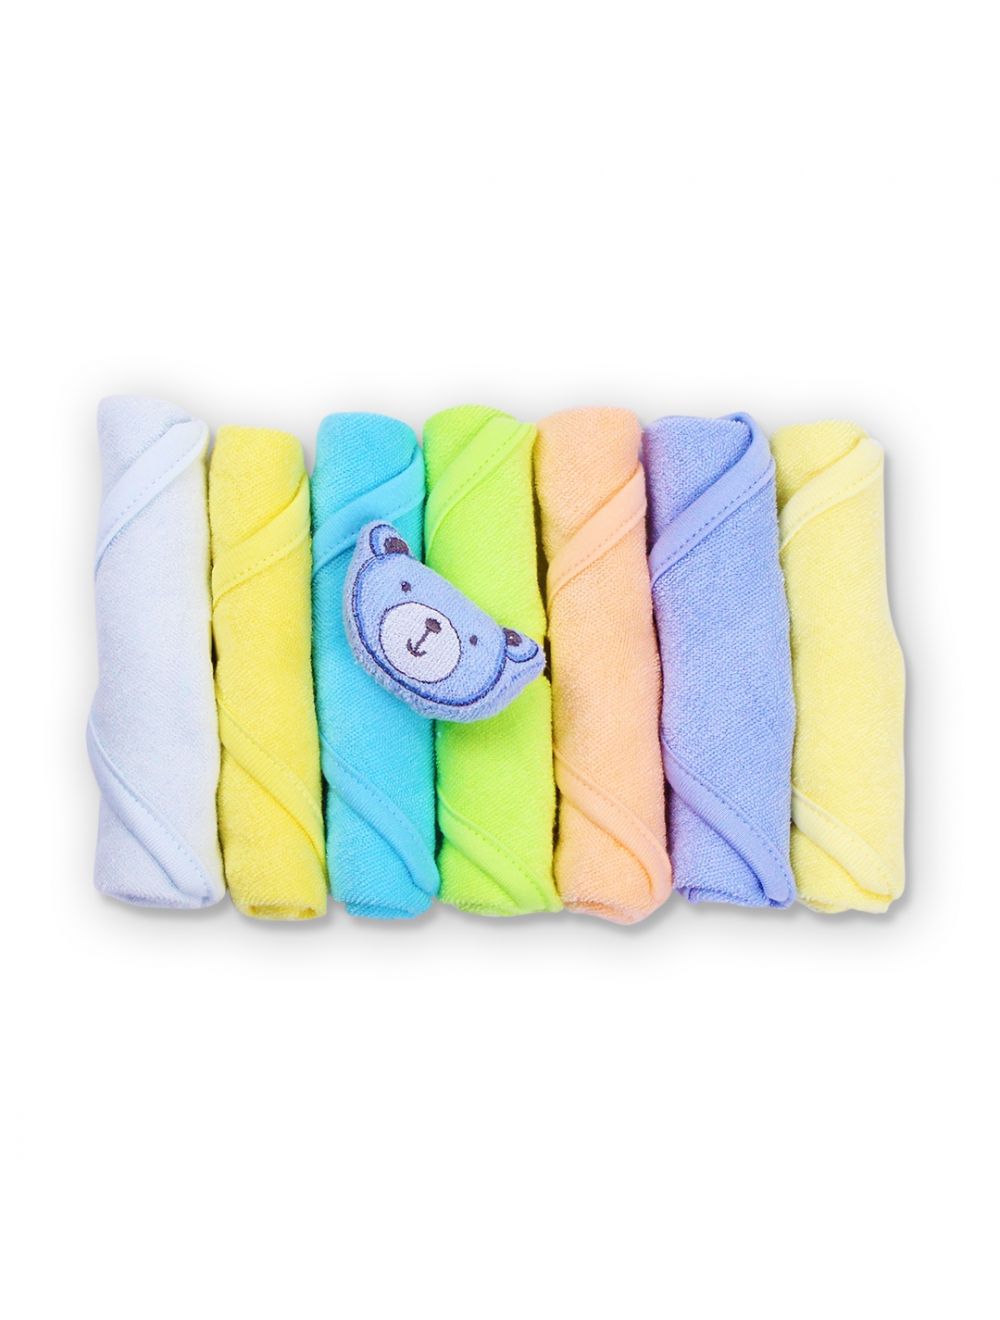 Little Star Pack of 7 Face Towels Multicolor